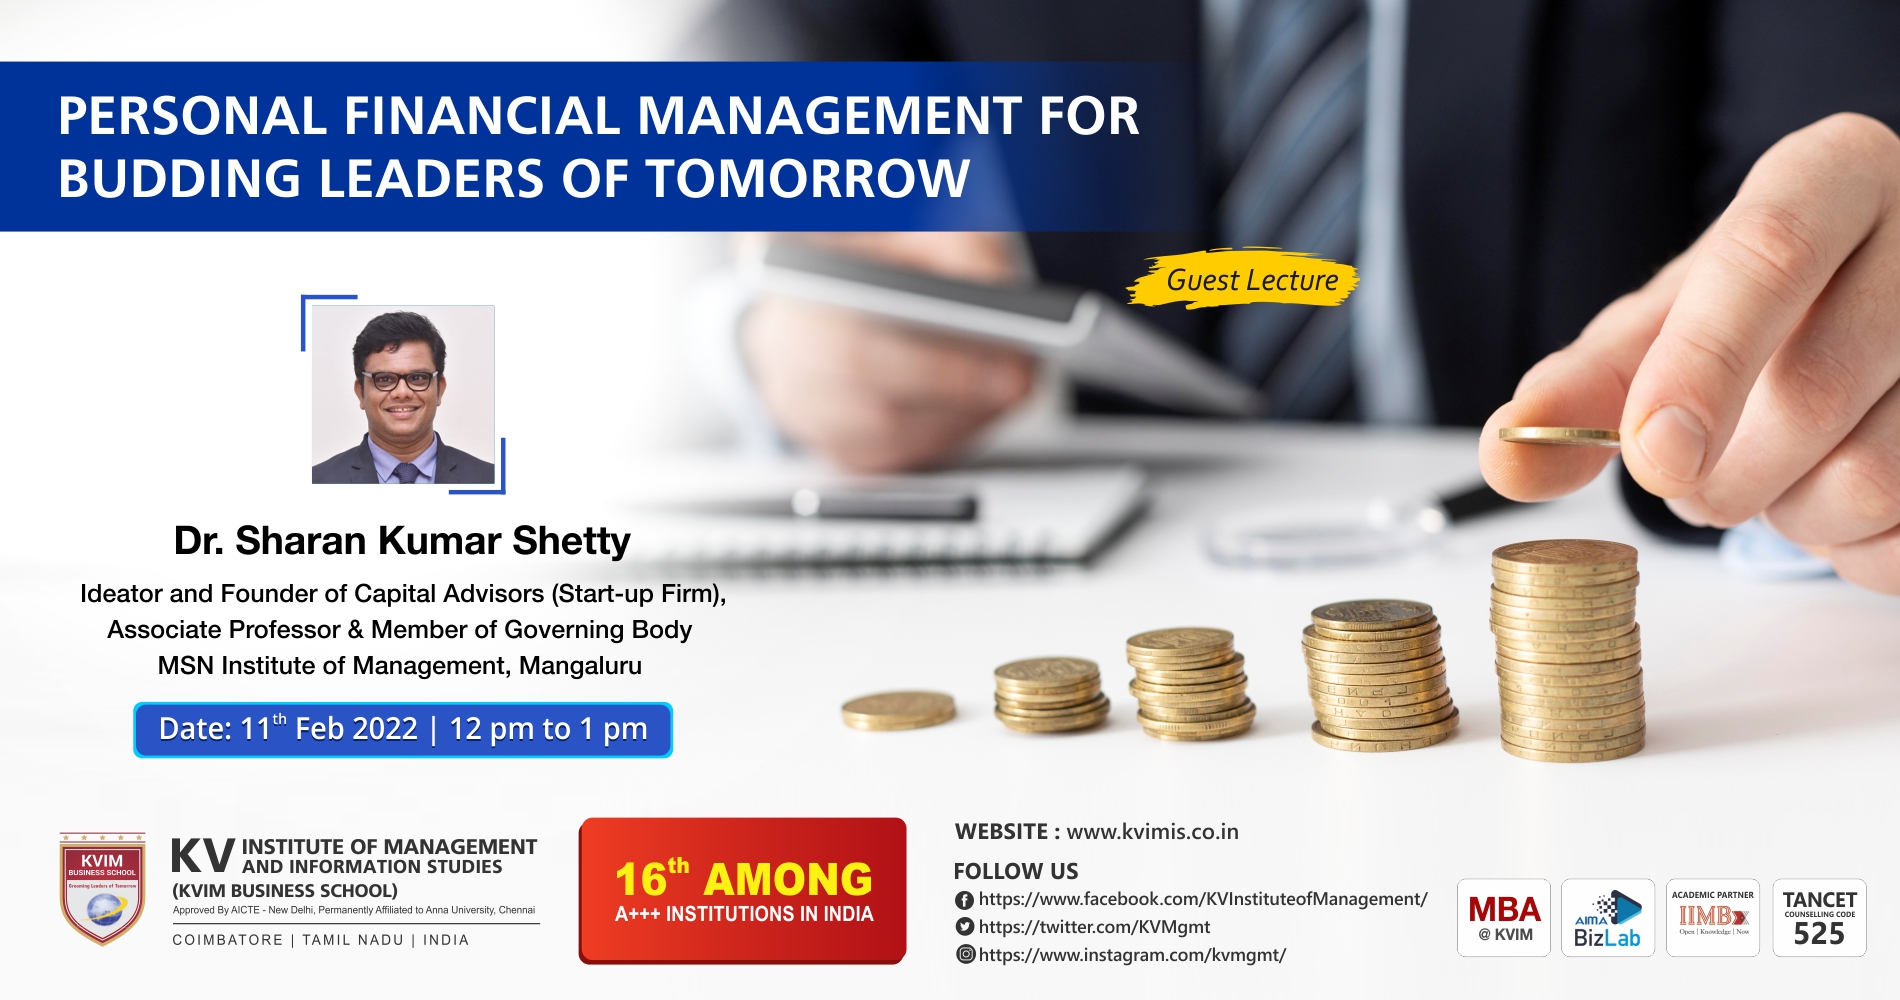 Personal Financial Management for Budding Leaders of Tomorrow 2022